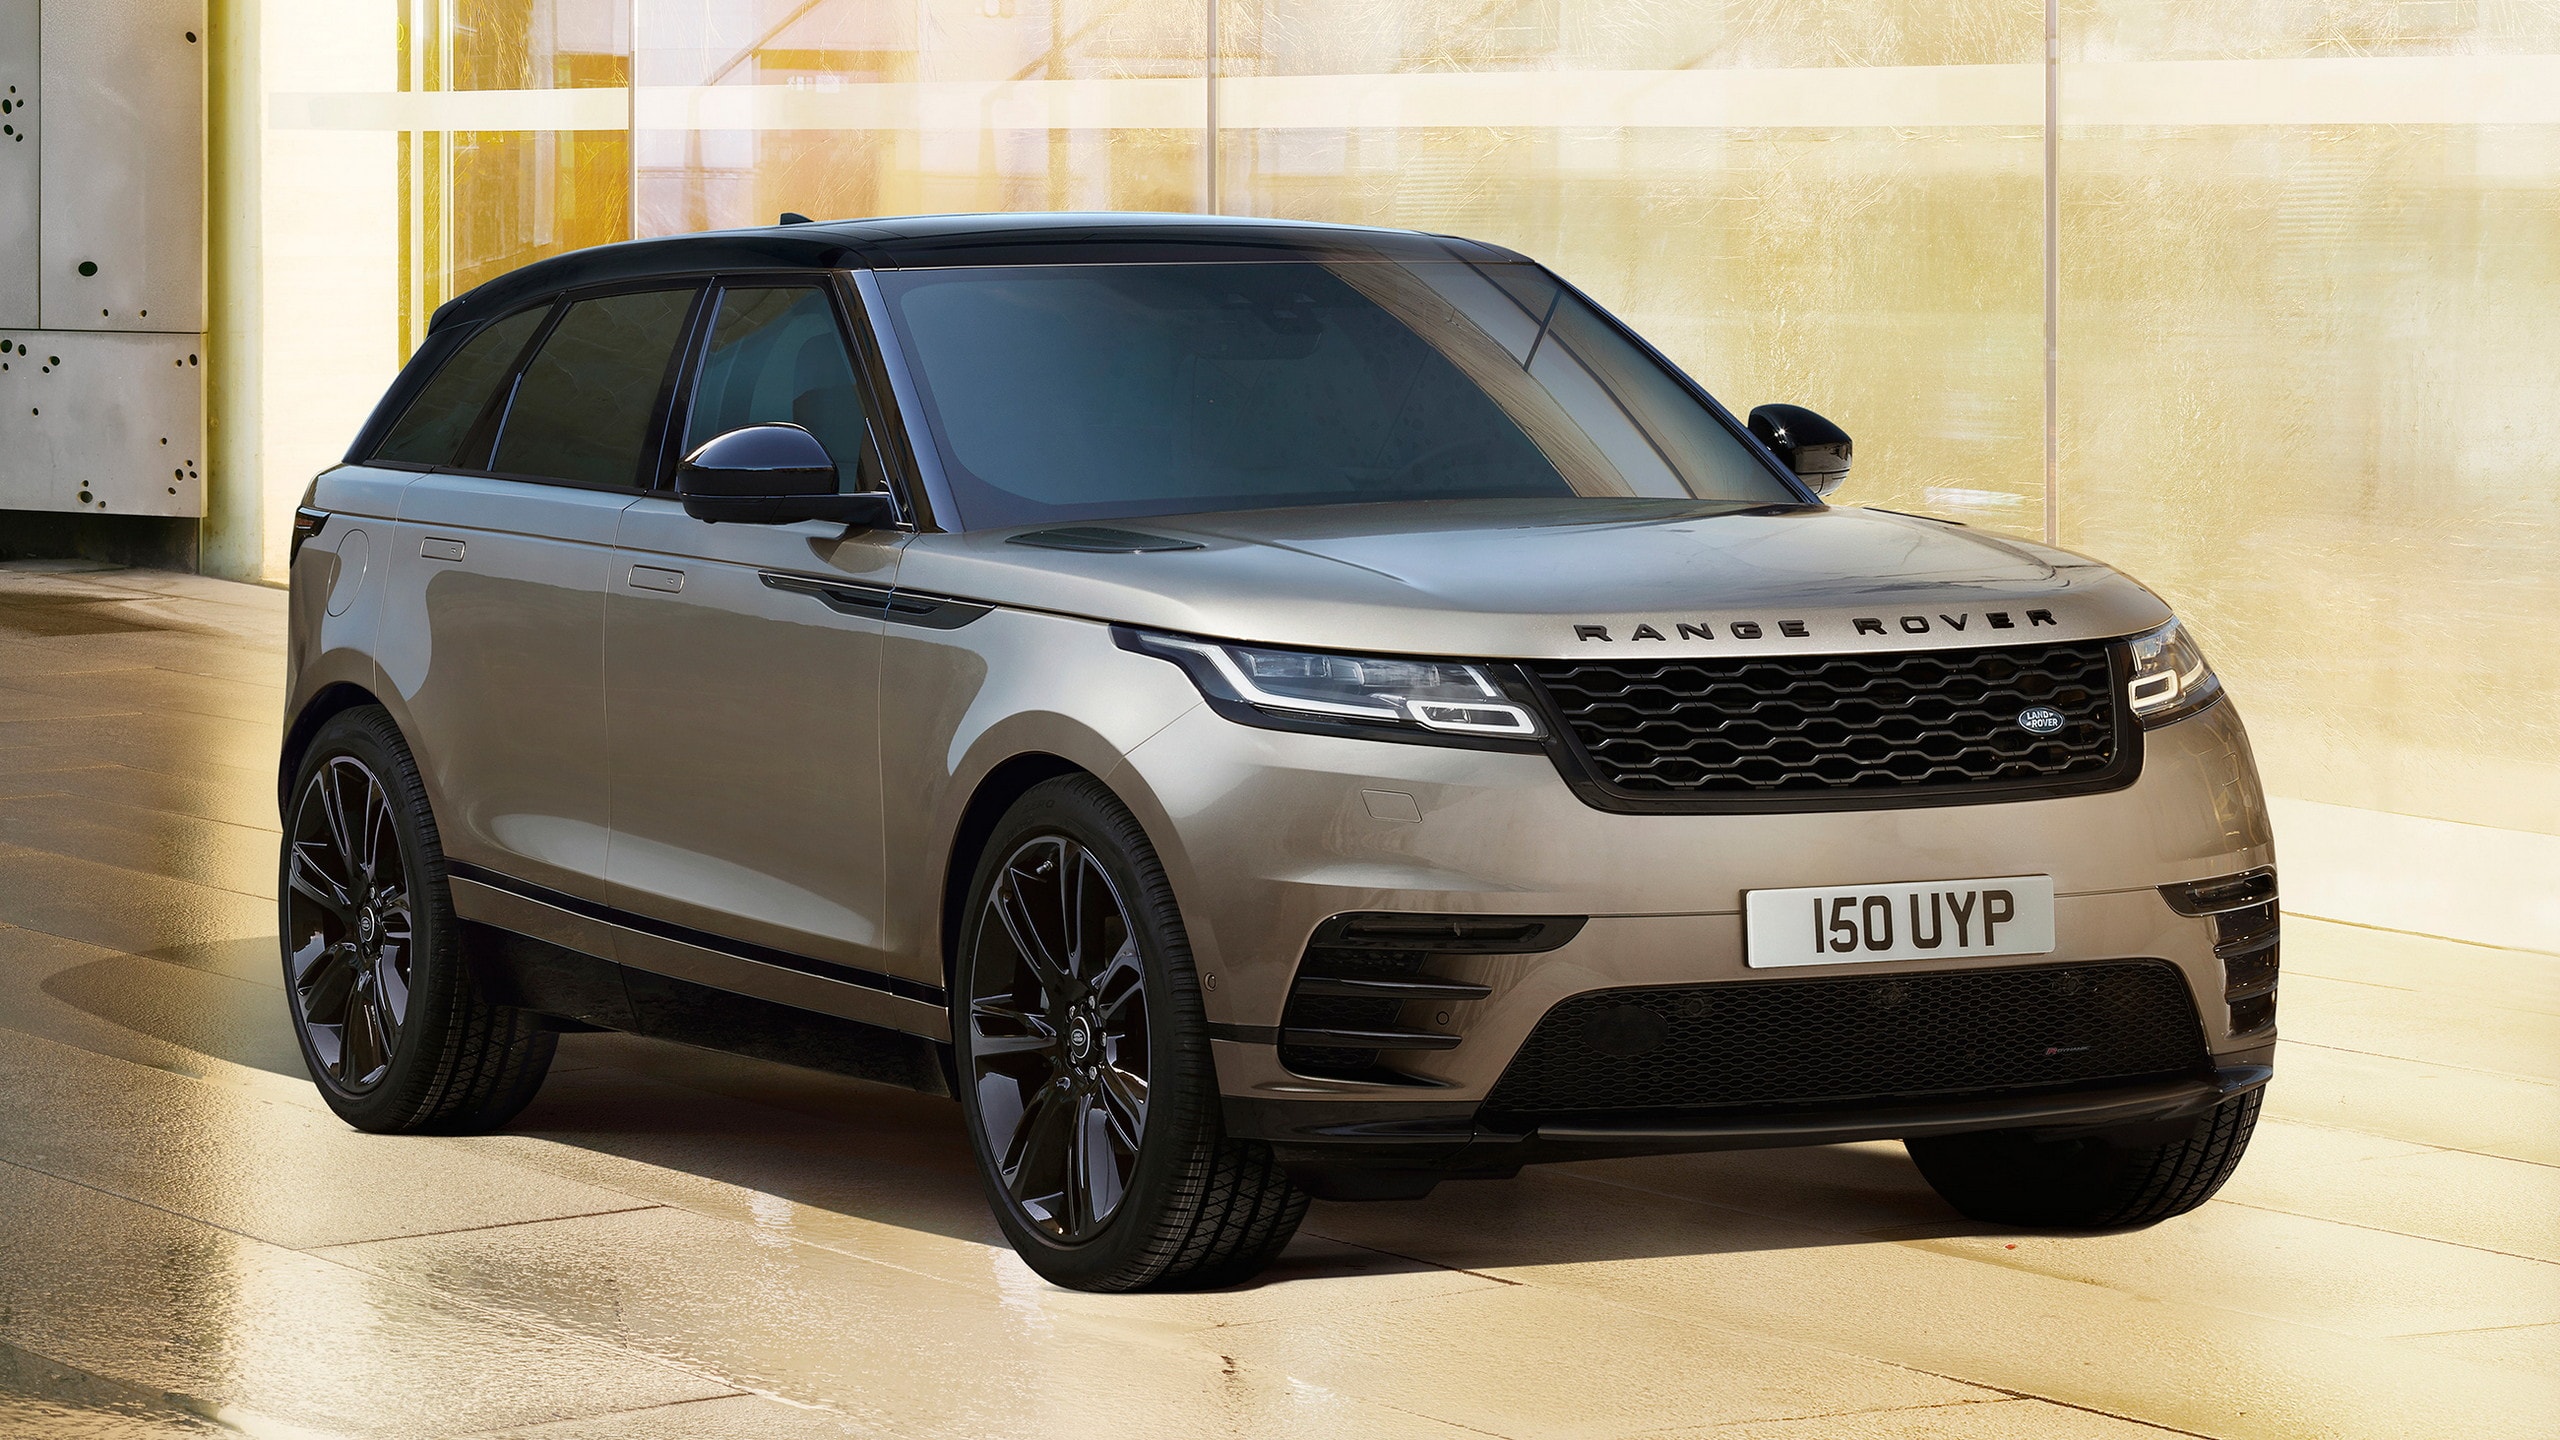 2023 Range Rover Velar Unveiled, but It's Not What We Expected